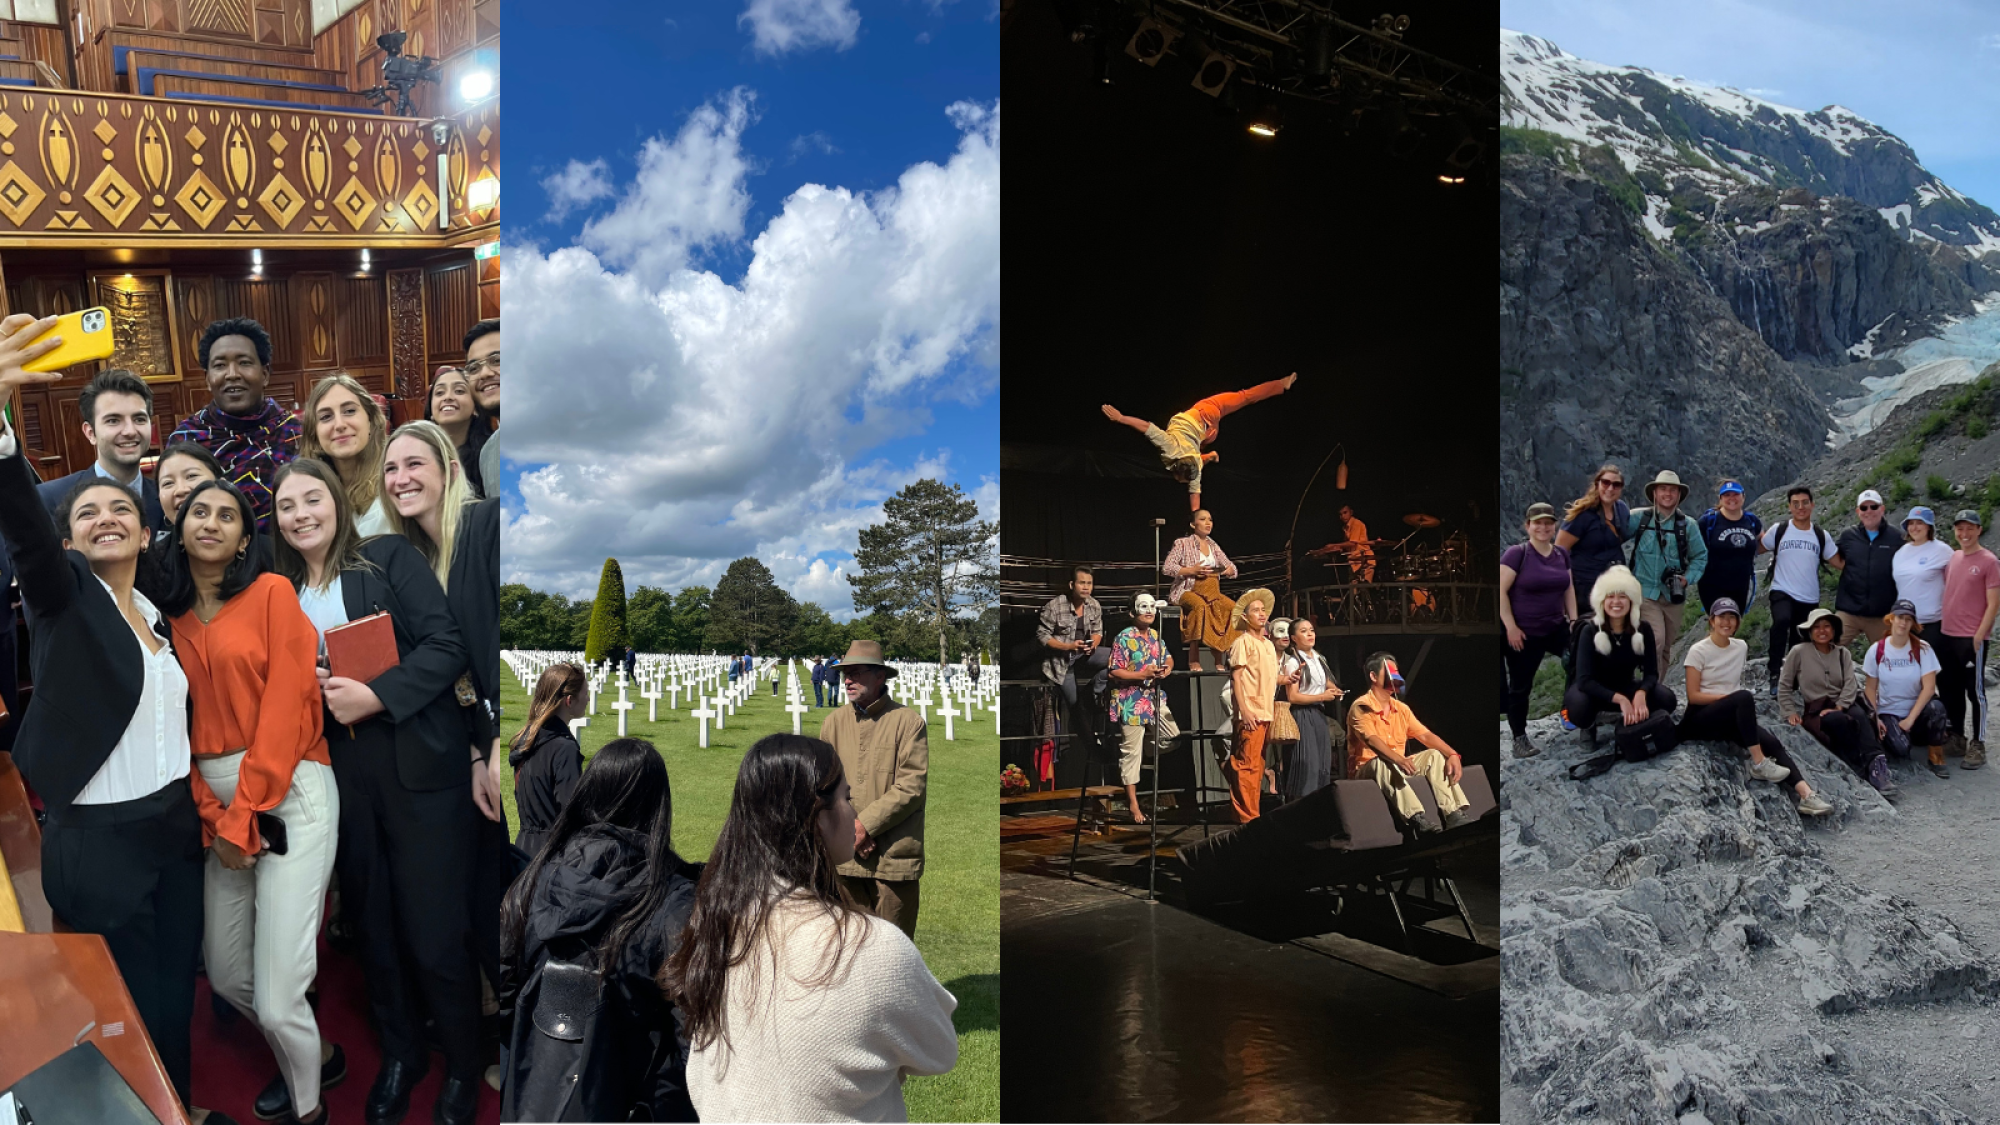 A photo featuring a collage of the following images: students taking a selfie with a Maasai senator, students touring the Normandy American Cemetery, artists performing dance or gymnastics, and students taking a photo next to a receding glacier